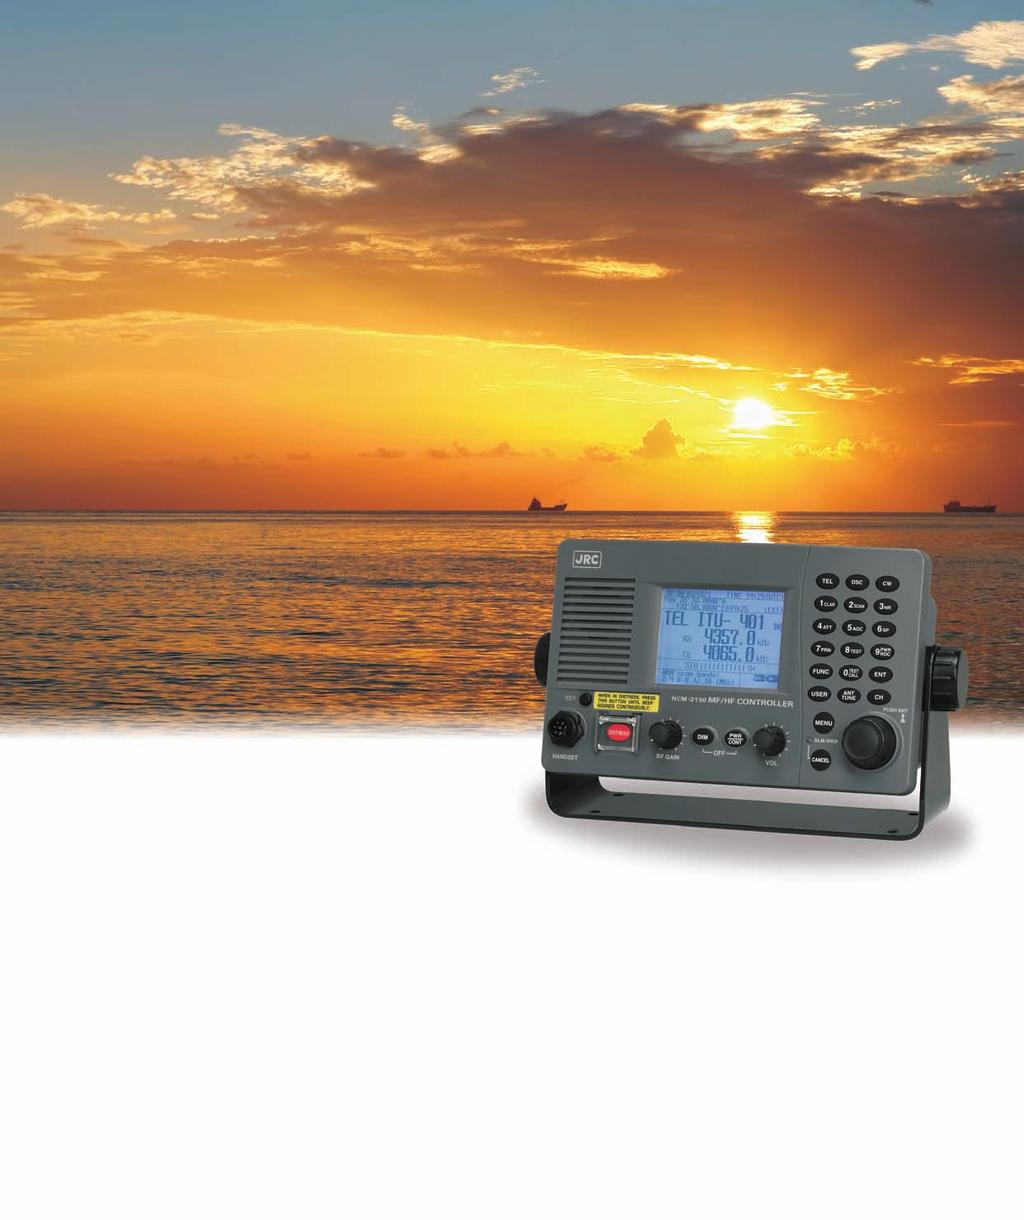 JSS-2150 MF/HF radio equipment the newly designed 150W MF/HF radio equipment delivers enhanced performance and stability 3.